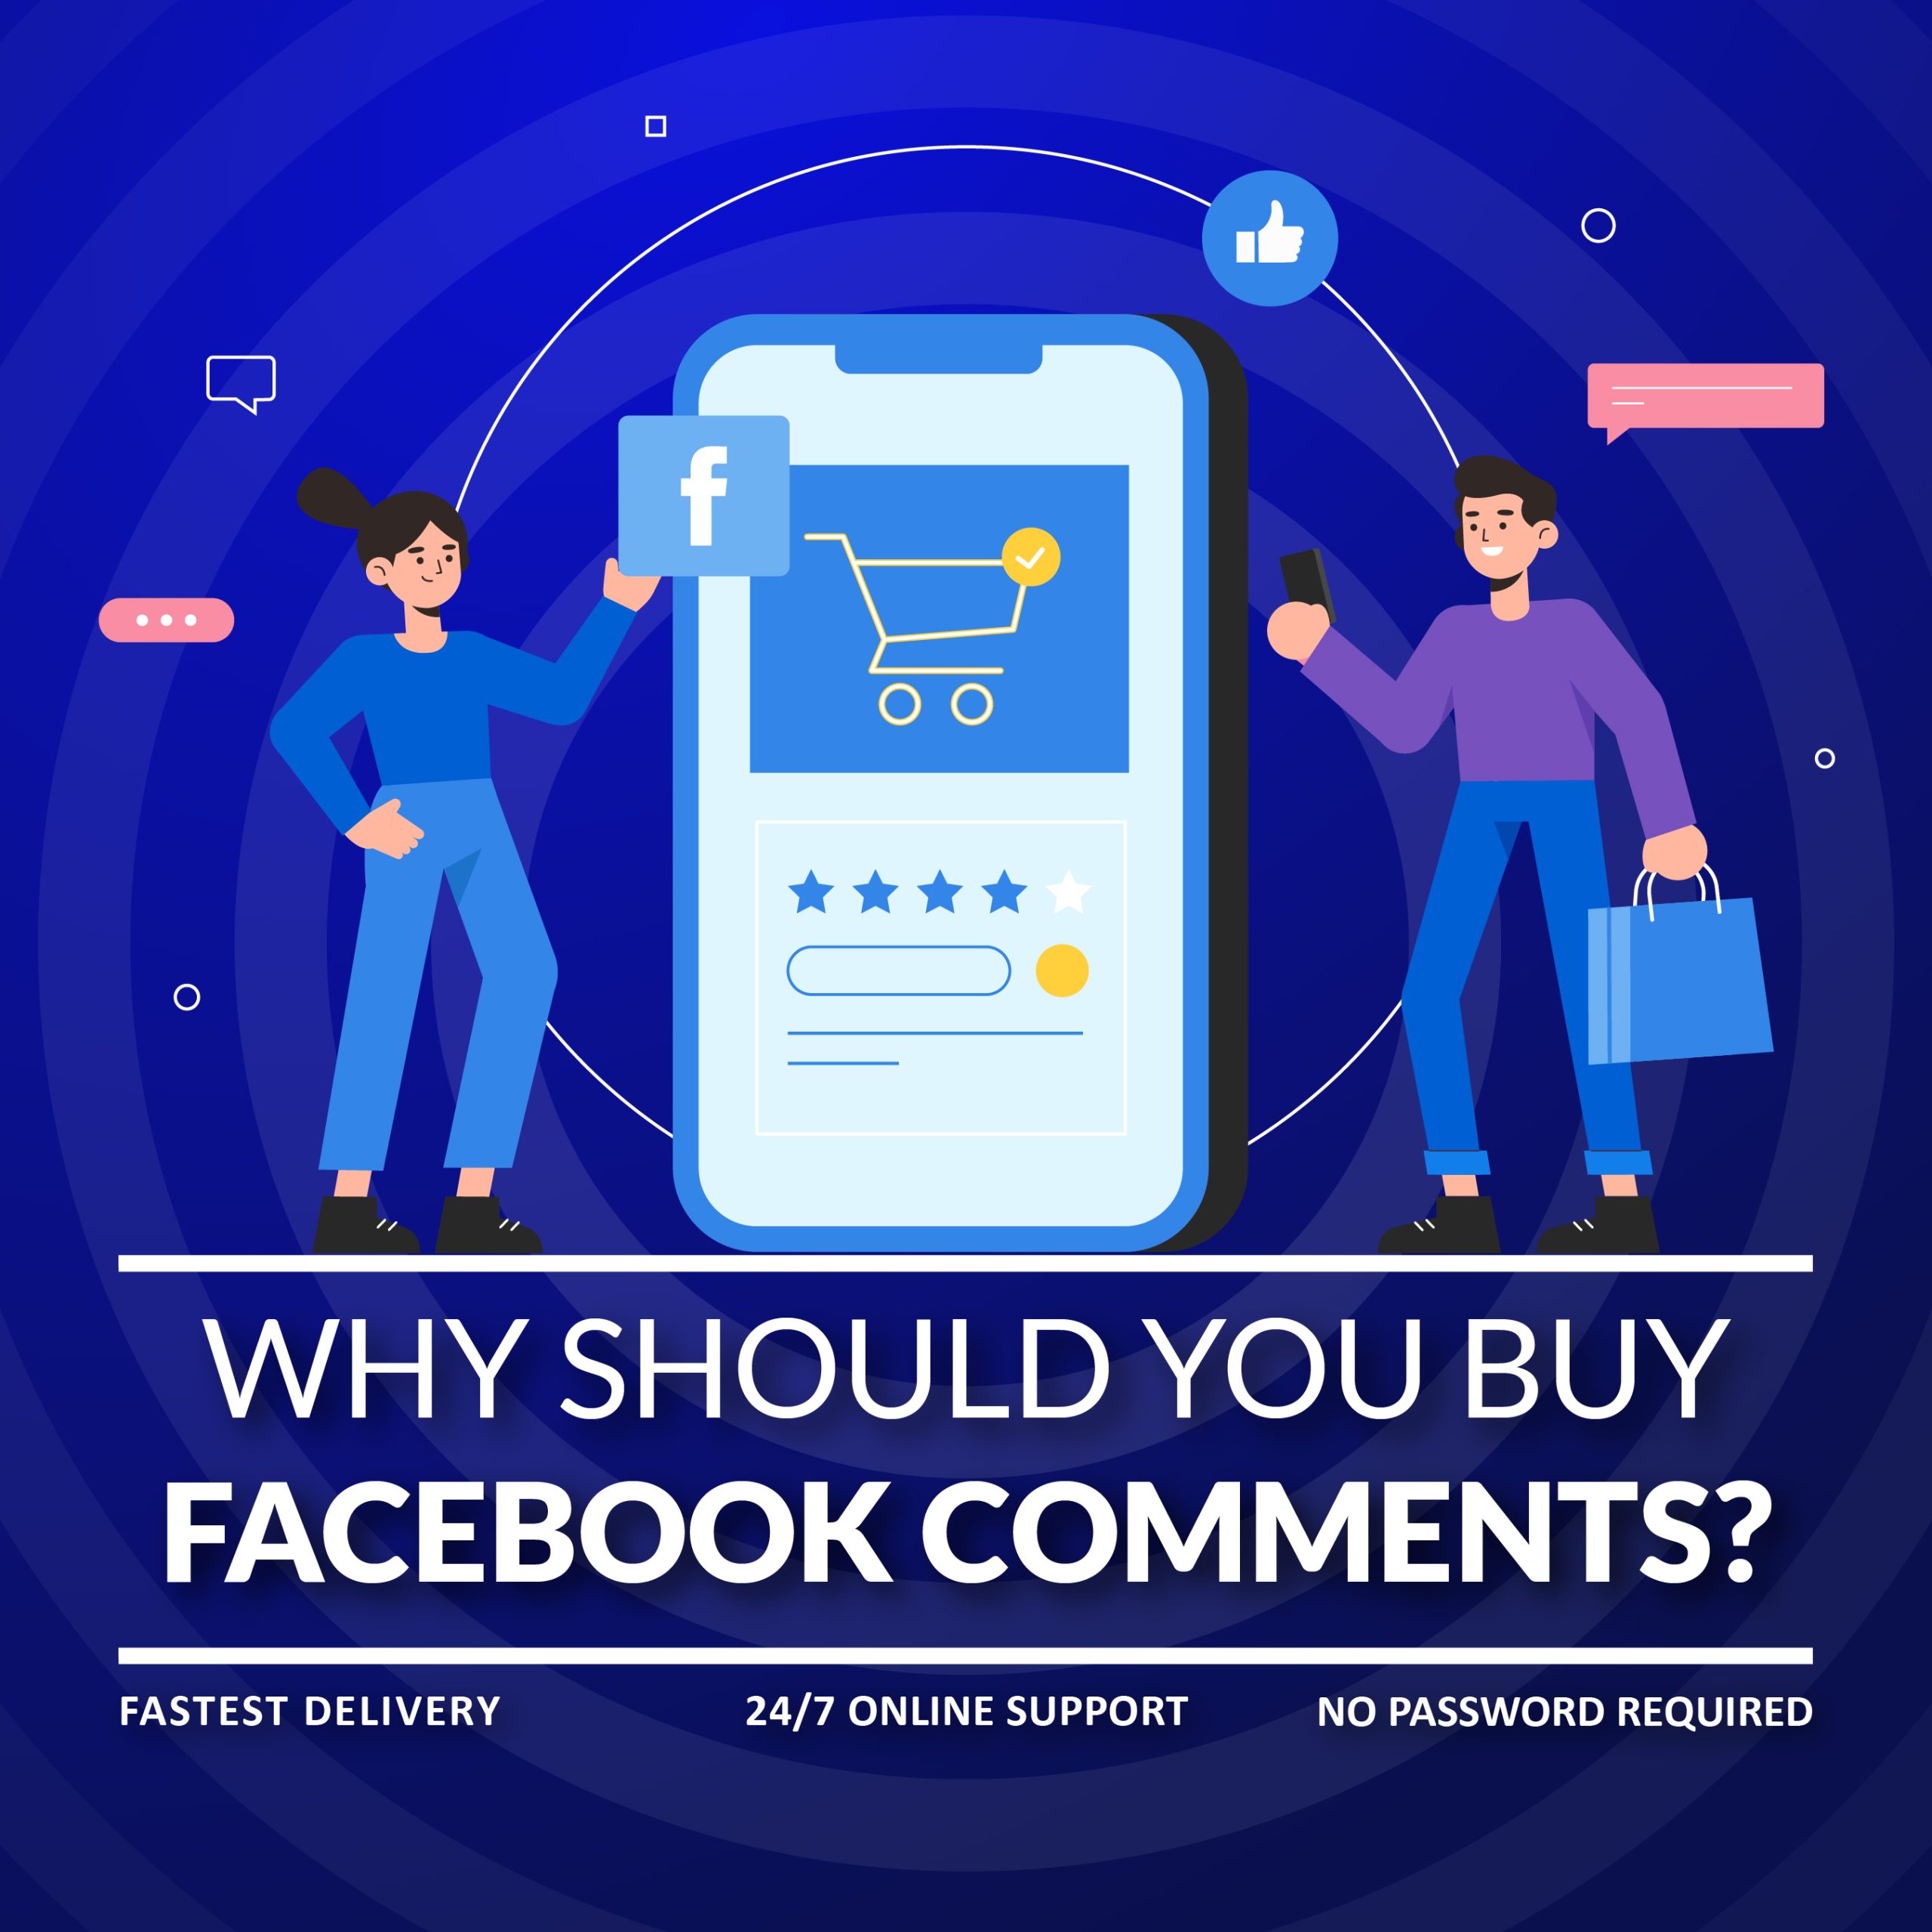 Why Should You Buy Facebook Comments?